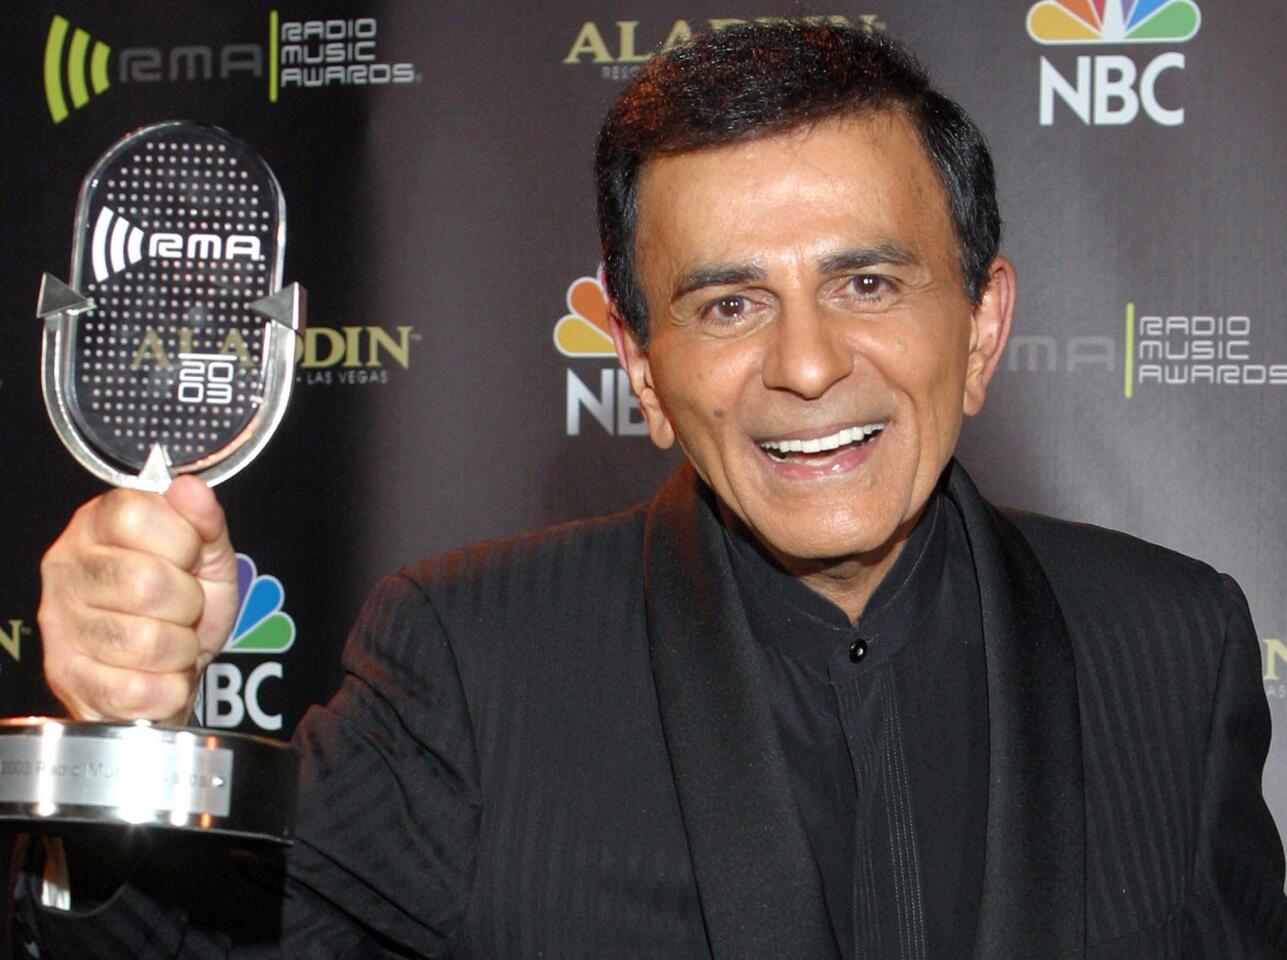 Casey Kasem transitioned to 'comfort-oriented care' after court ruling